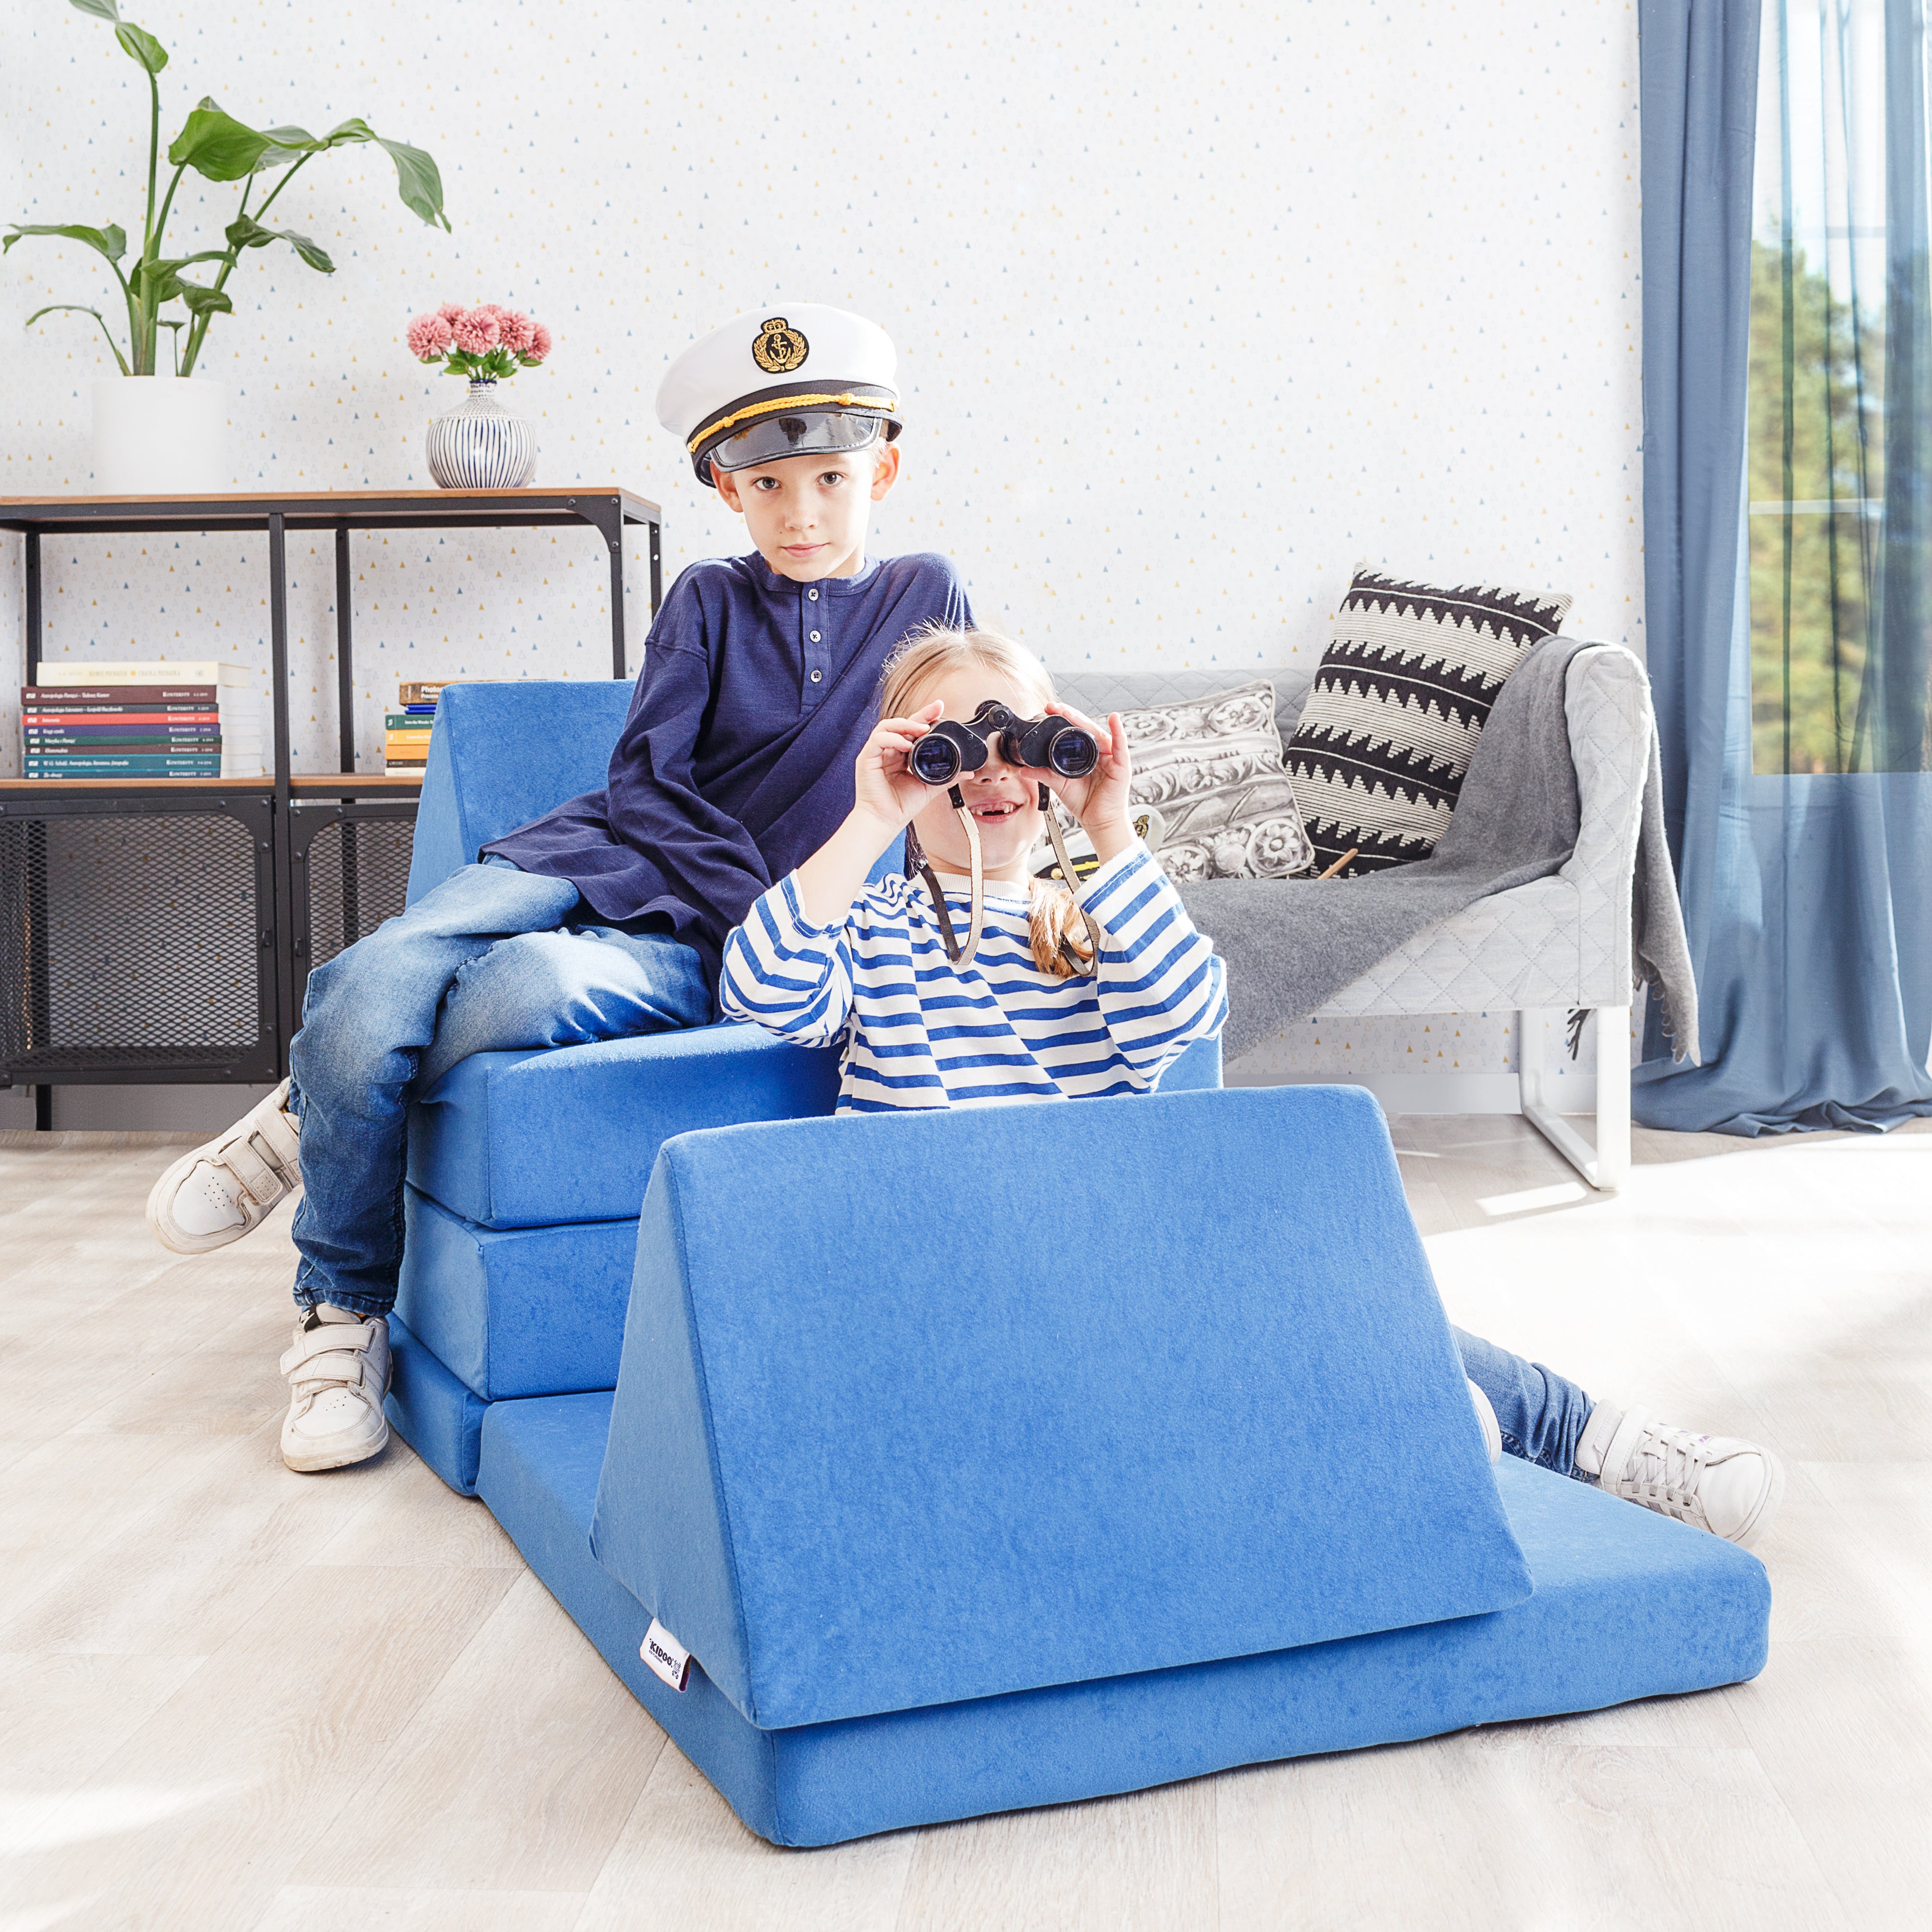 K-101 - Versatile 4-in-1 Children's Playset in Blue | Climbing and Crawling Set | Activity Blocks for Sofa, Mattress | Fold-Out Lounge | 4-Piece Lightweight Colorful Interactive Baby Play Set